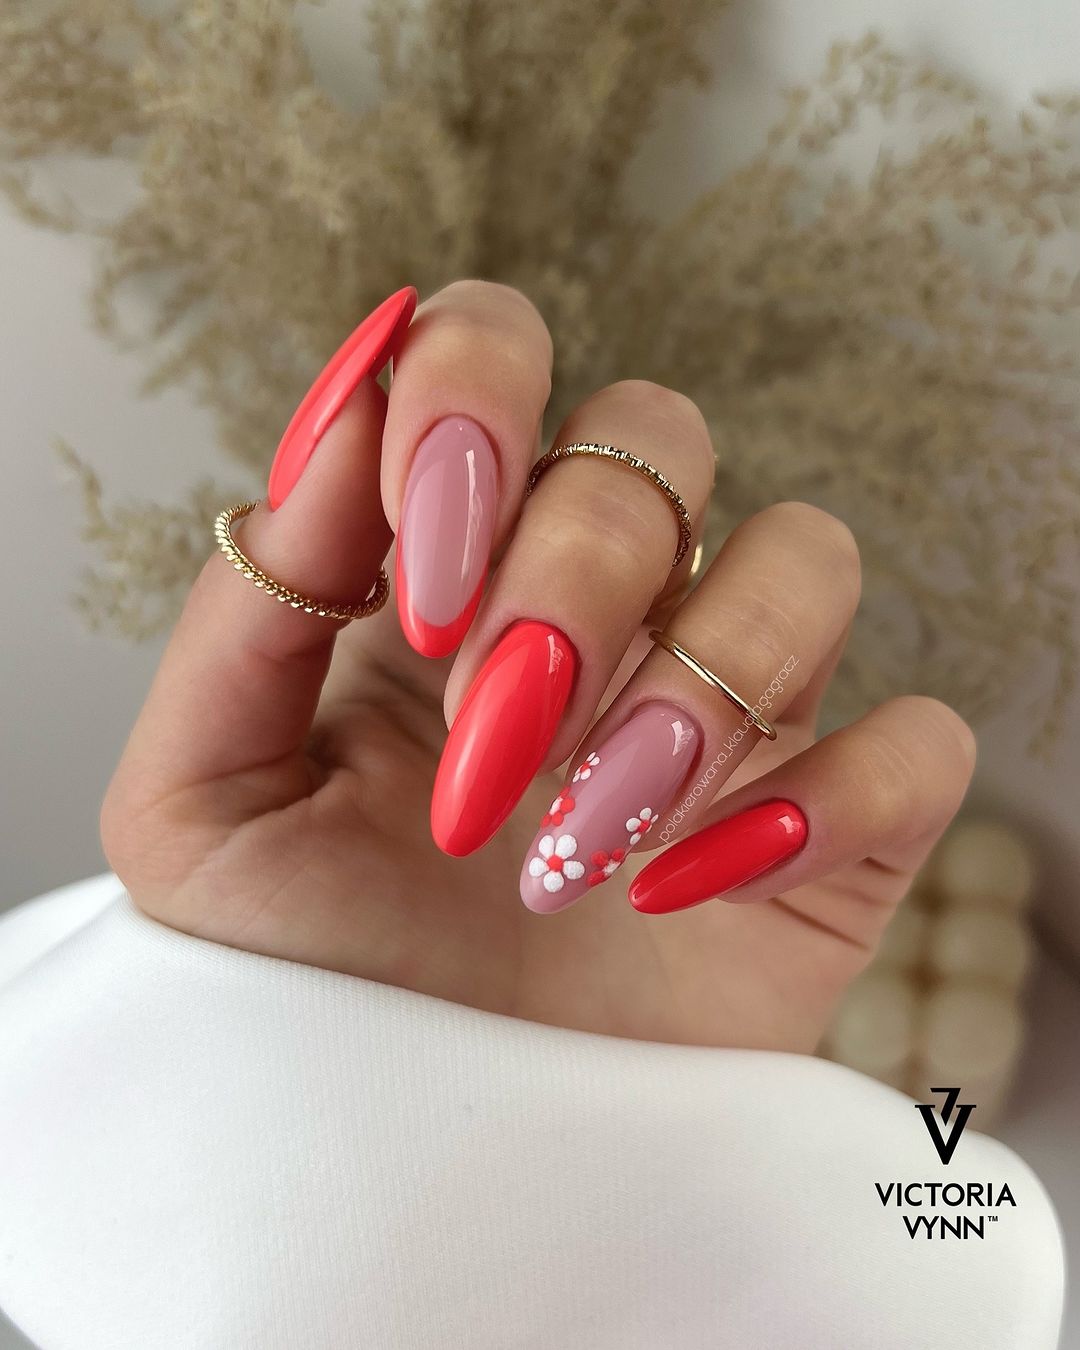 Beige And Red Almond Nails With Floral French Mani